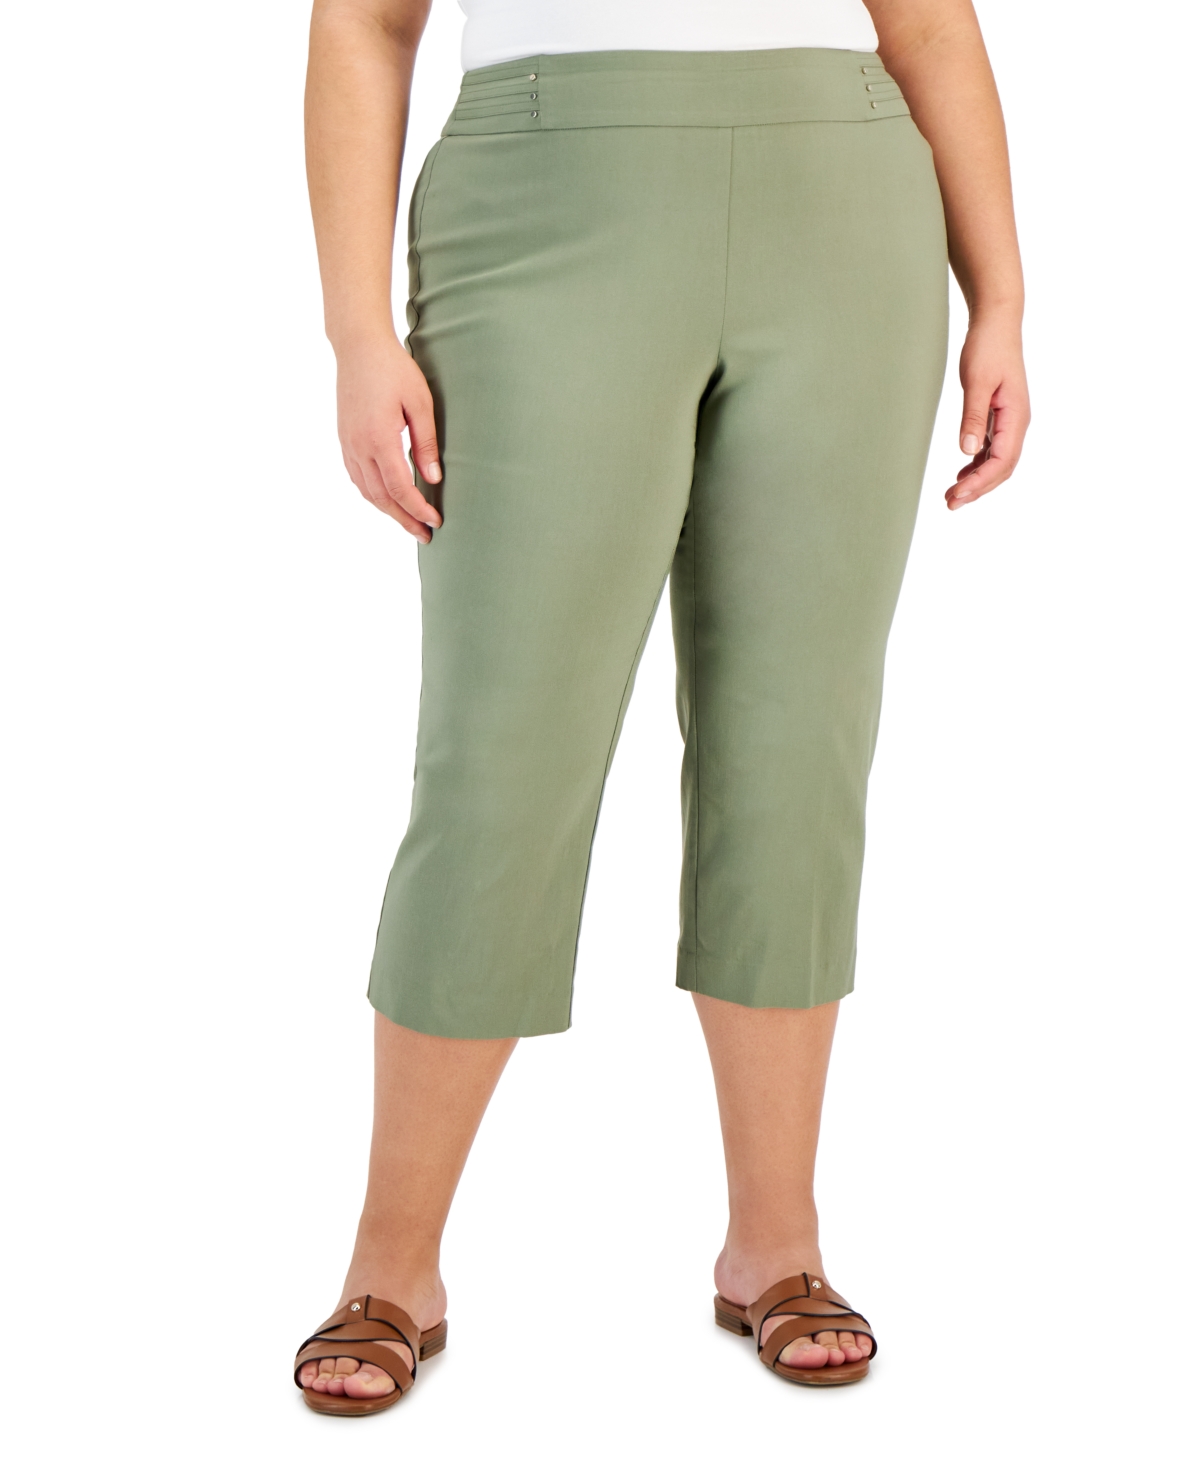 Jm Collection Plus Size Tummy Control Pull-on Capri Pants, Created For Macy's In Tarnished Stem